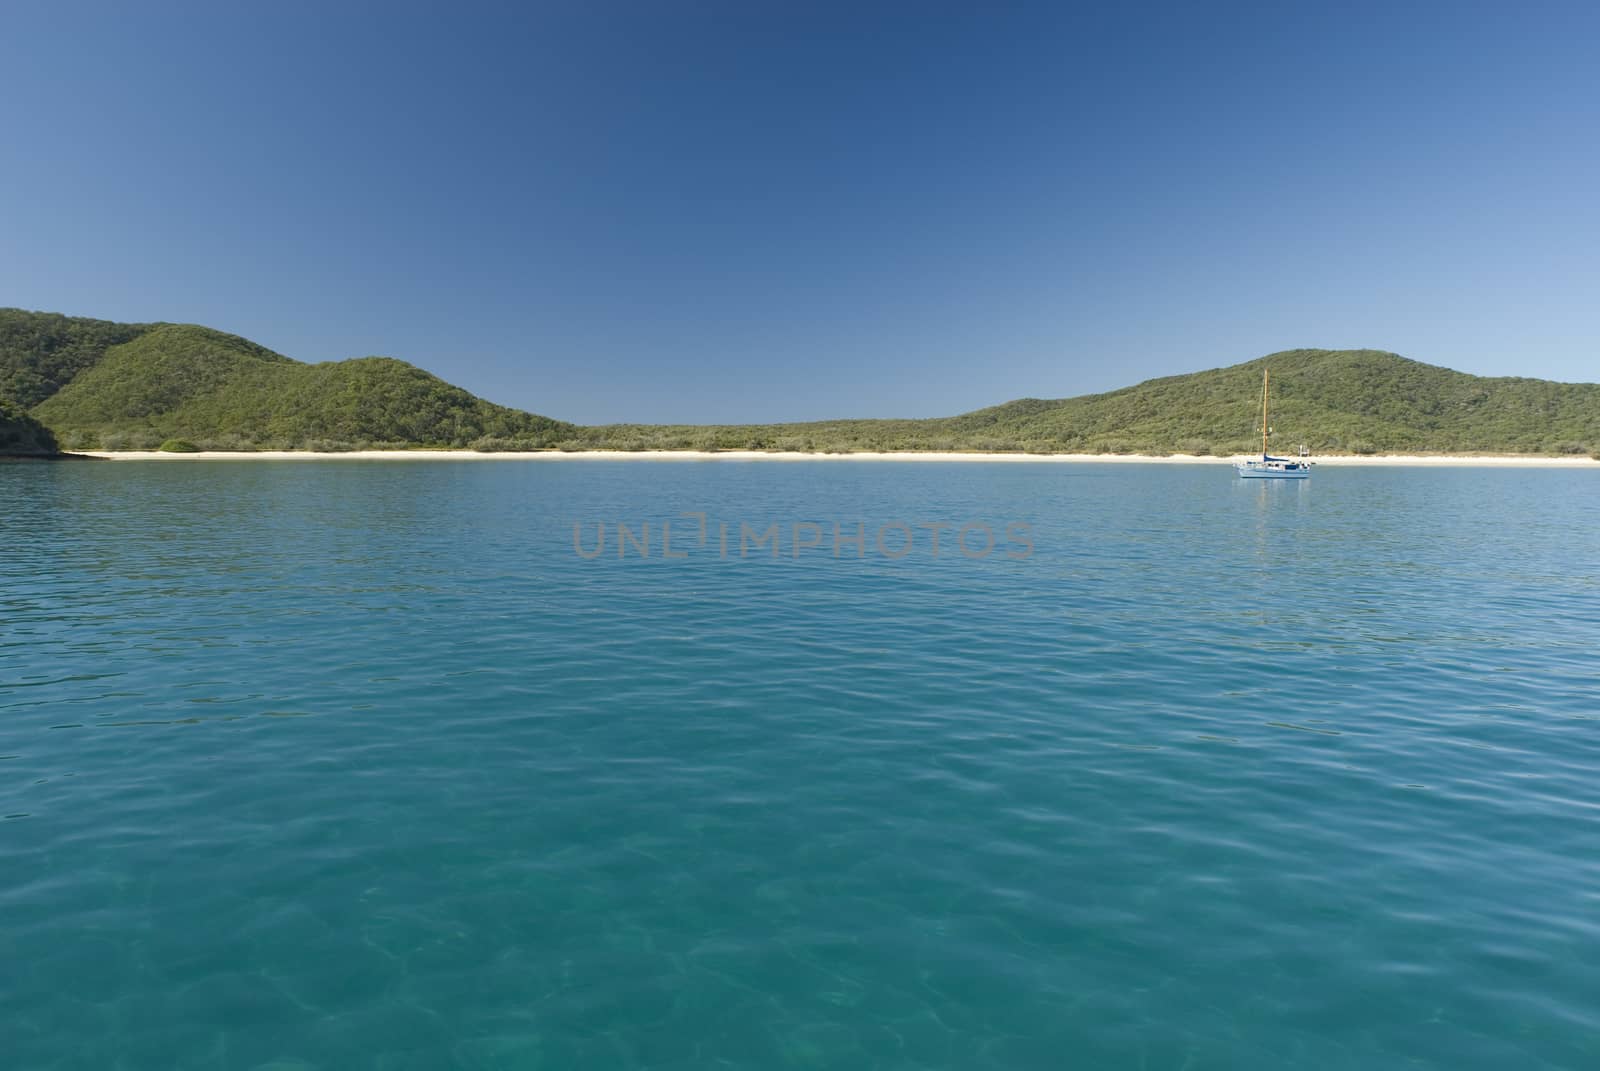 Great Keppel Island Secluded Tropical Beachs by stockarch